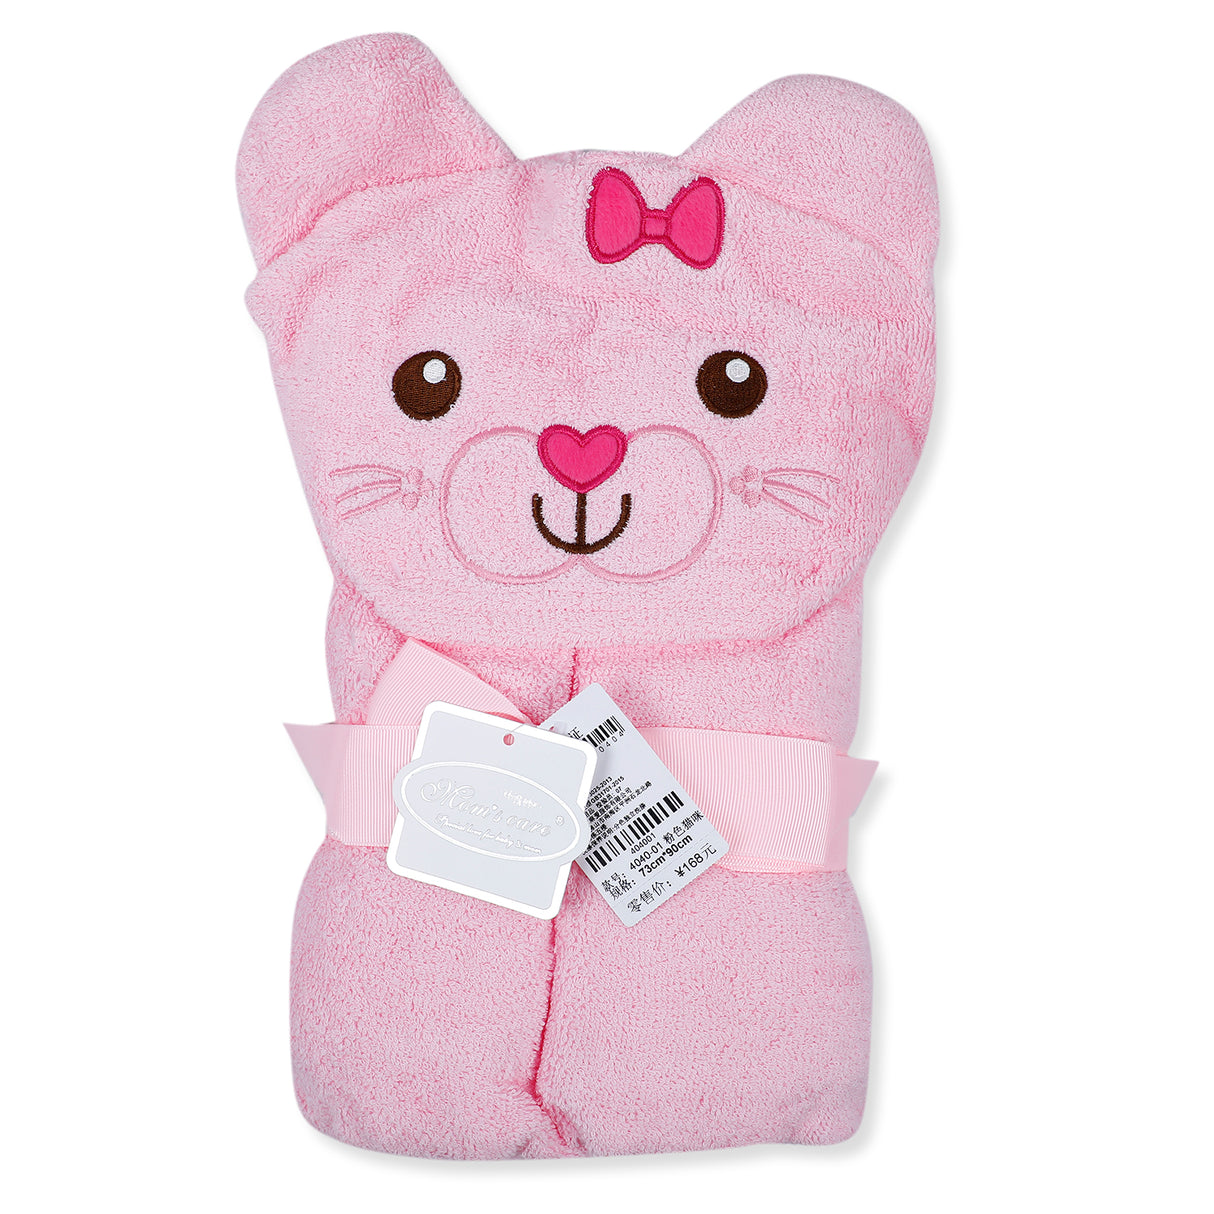 Moms Care Hooded Towel